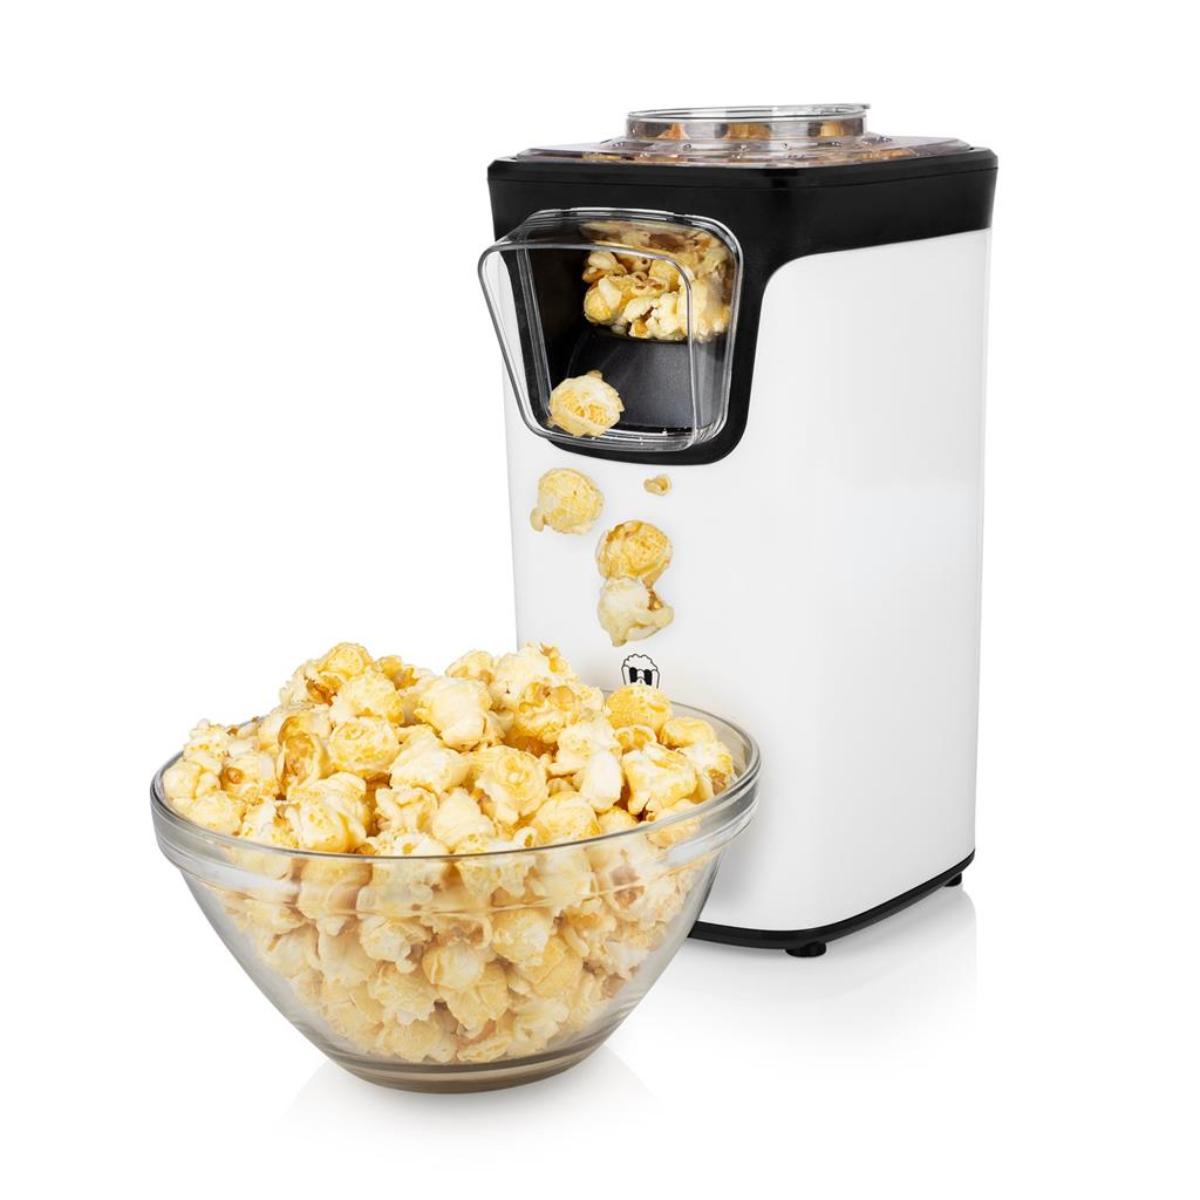 01.292986.01.001/Popcorn maker make your owin home made popcorn in 3 minutes including measuring cup POP CORN / WHITE